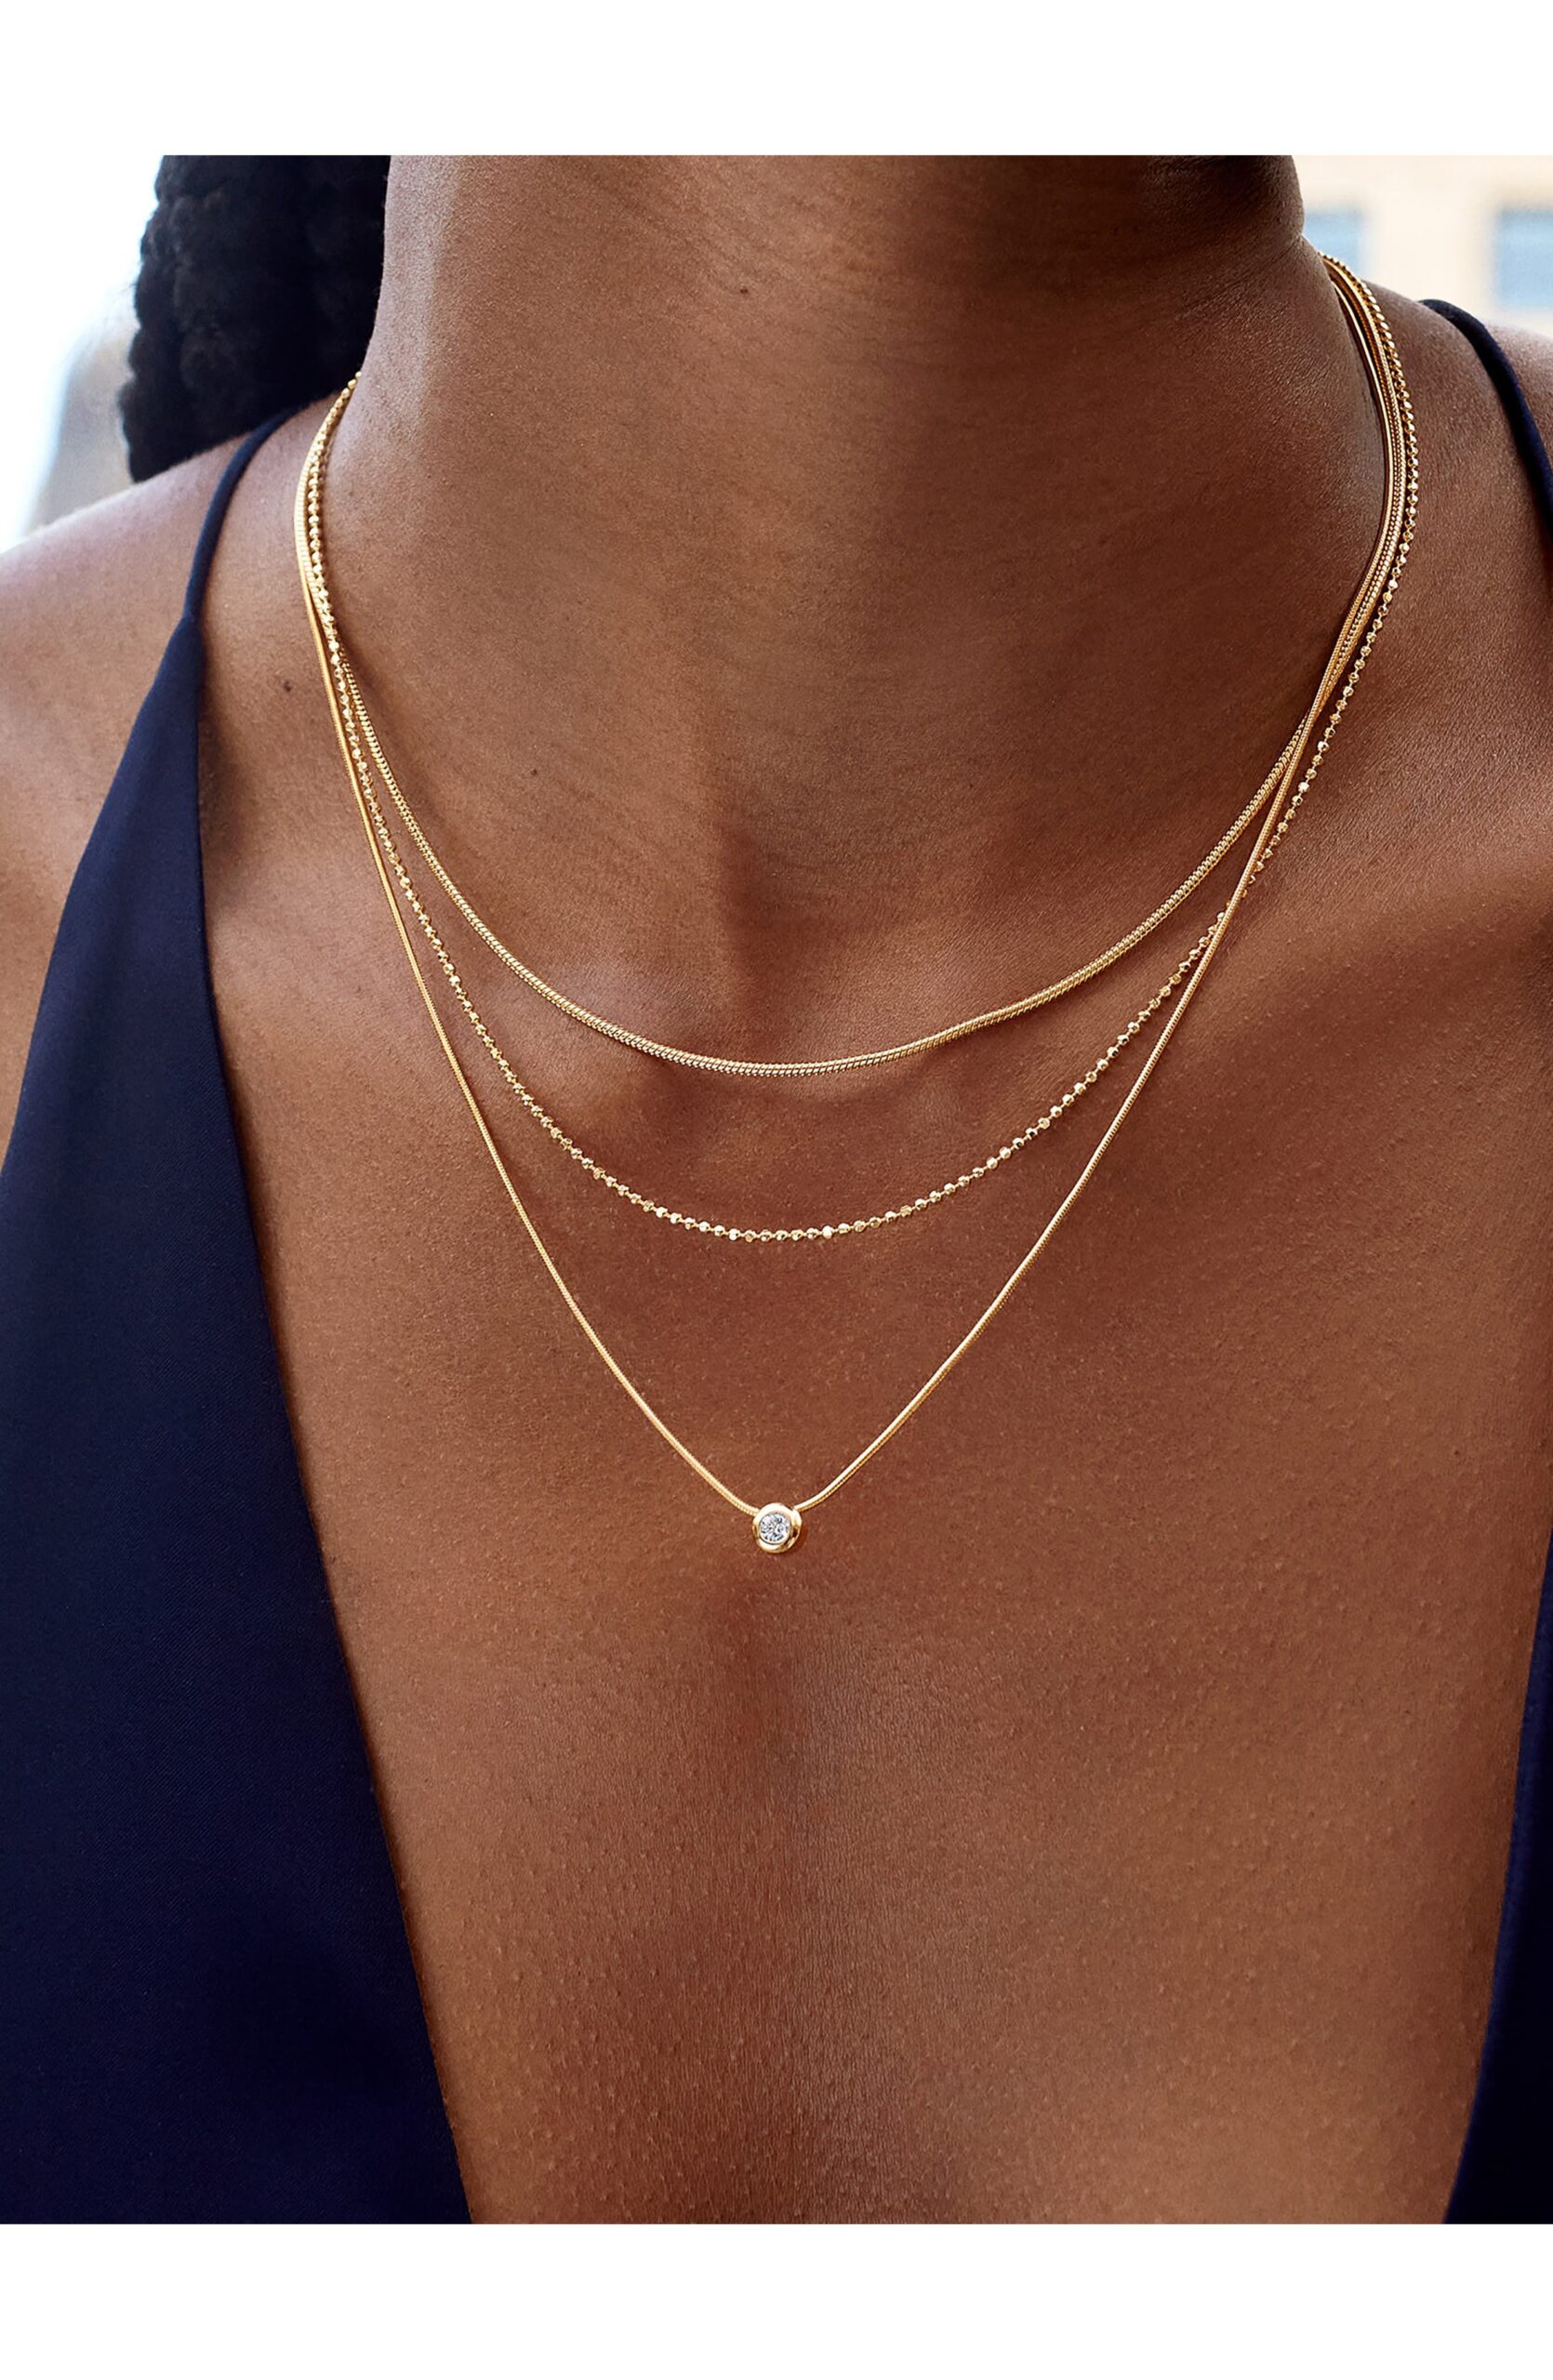 Gold Chain Designs: Elevate Your Look with Timeless and Elegant Gold Chain Designs